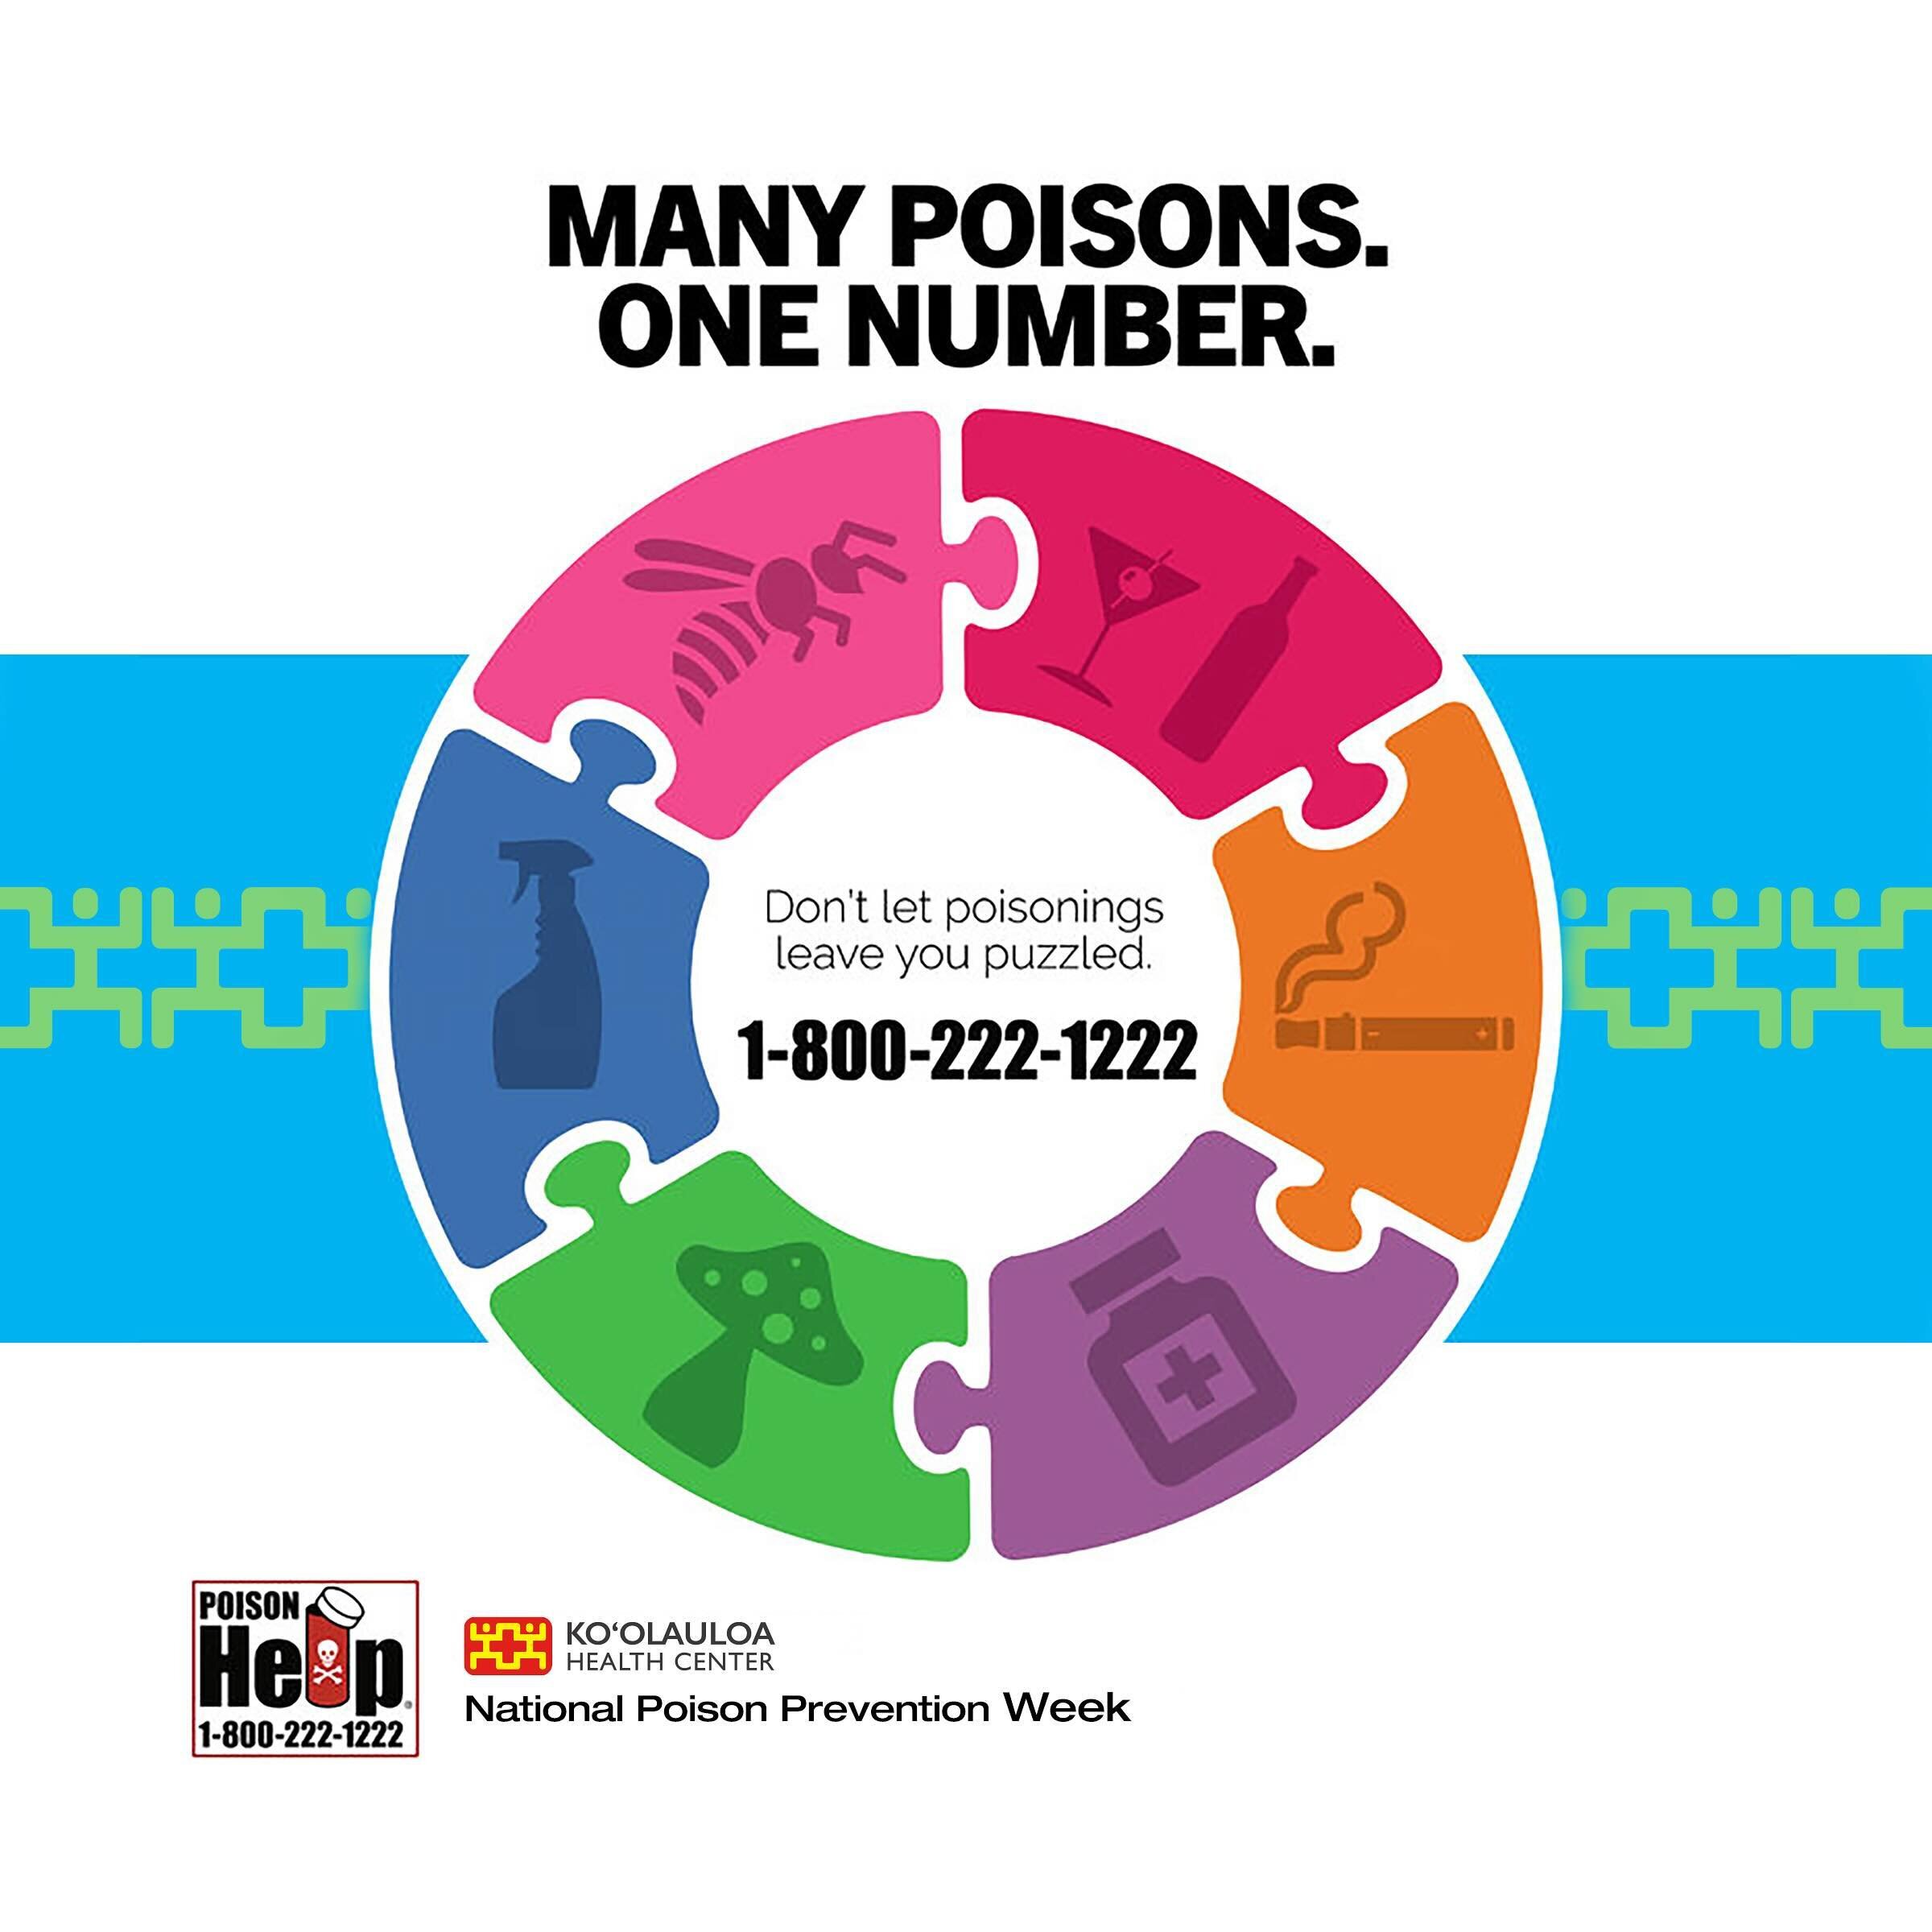 Aloha &lsquo;Ohana,

Did you know that every year, Americans report more than 2 million cases of poisoning? This week during National Poison Prevention Week, all of us at KHC would like to thank all those who staff our Nation&rsquo;s poison control c